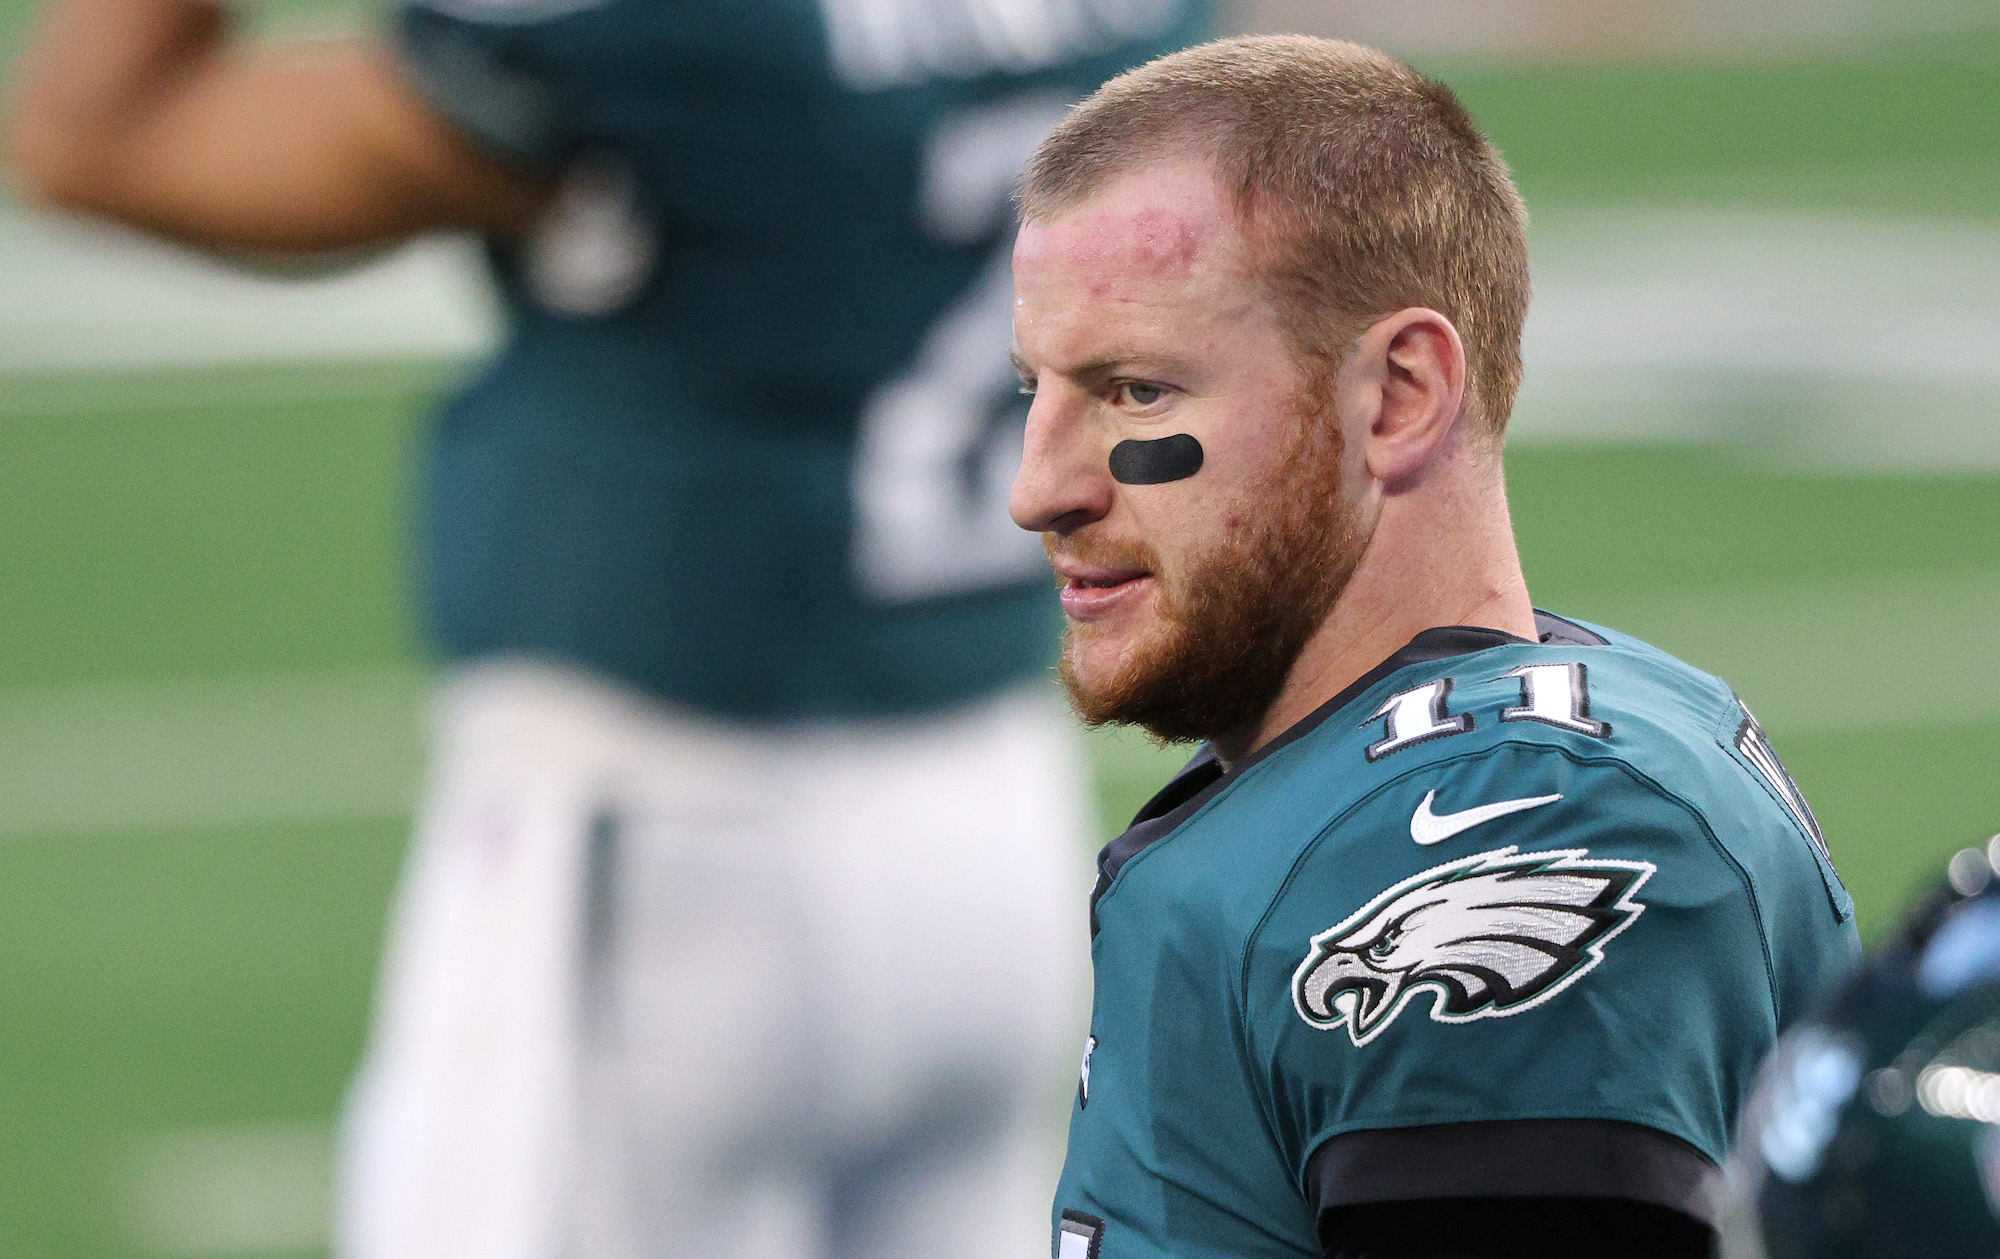 ARLINGTON, TEXAS - DECEMBER 27: Carson Wentz #11 of the Philadelphia Eagles looks on before the game against the Dallas Cowboys at AT&amp;T Stadium on December 27, 2020 in Arlington, Texas. (Photo by Ronald Martinez/Getty Images)